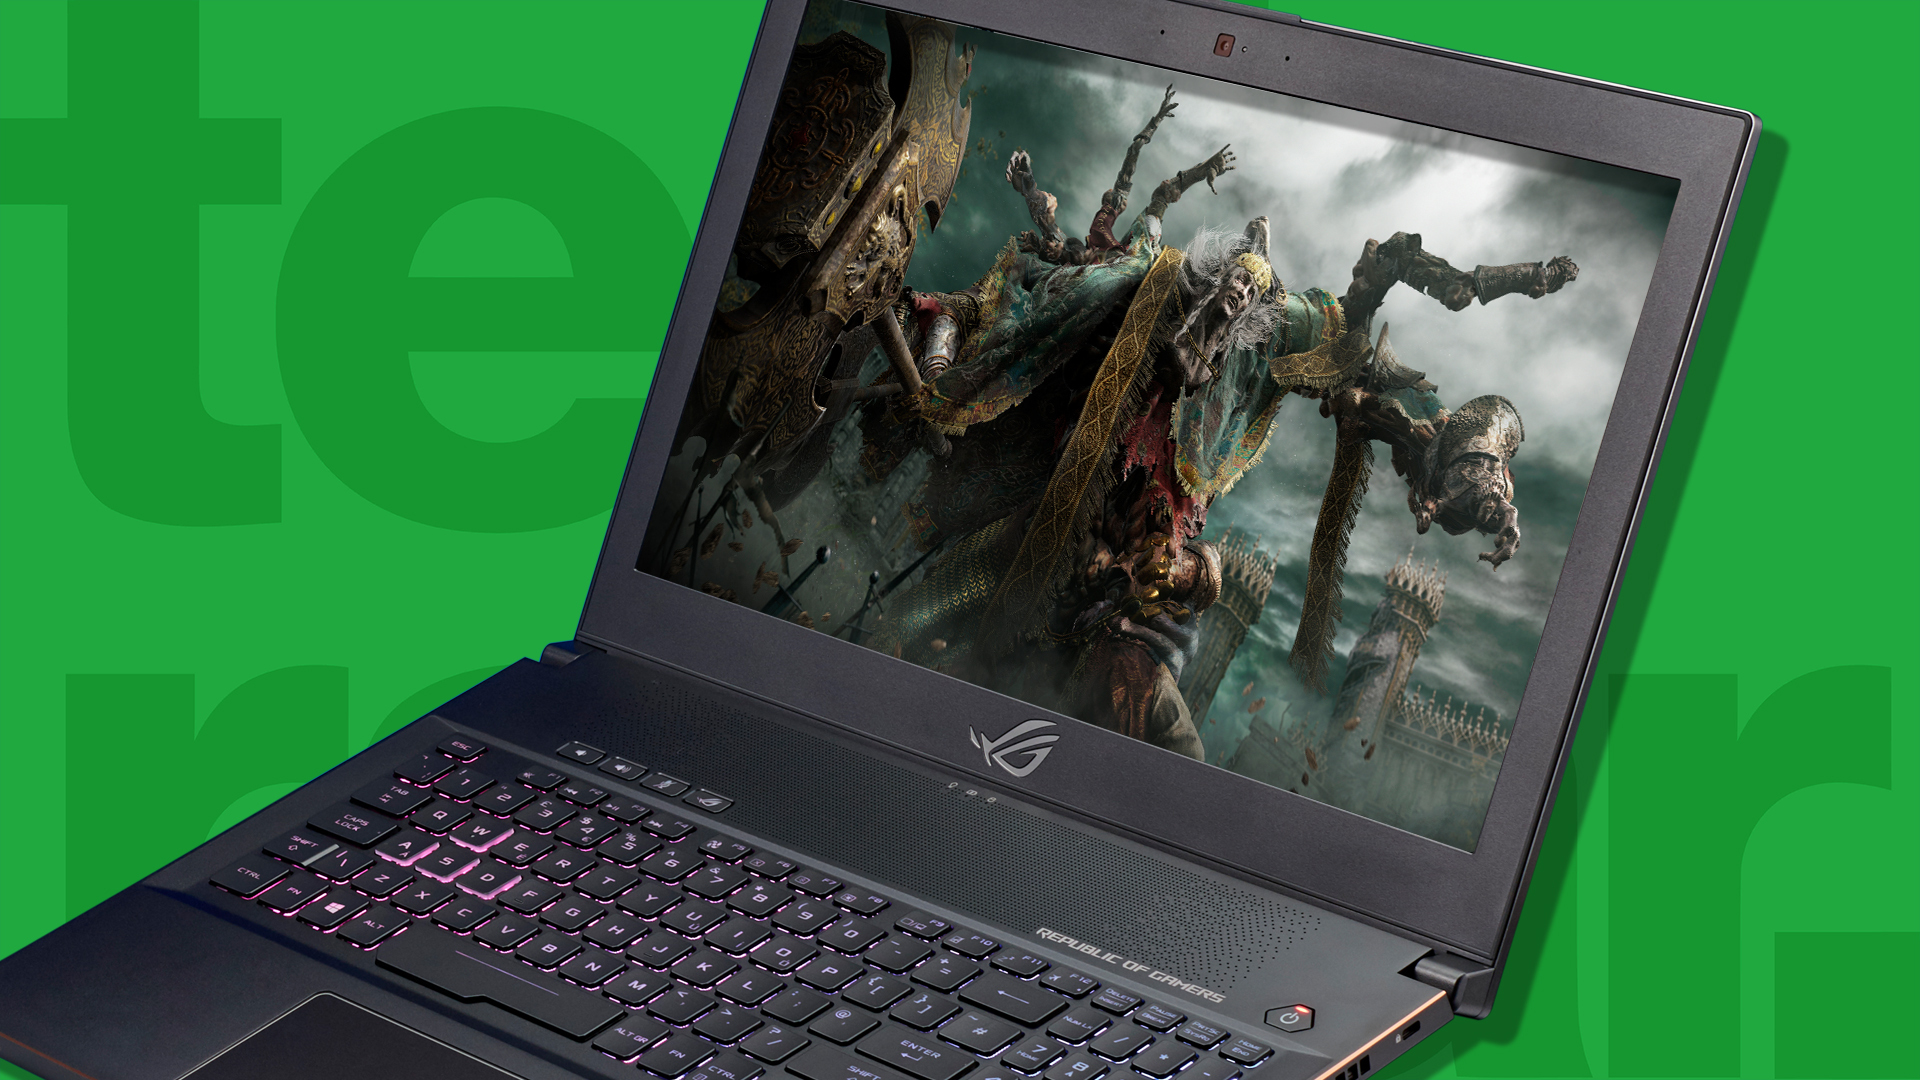 Playing Elden Ring on the Asus ROG gaming laptop against a green background